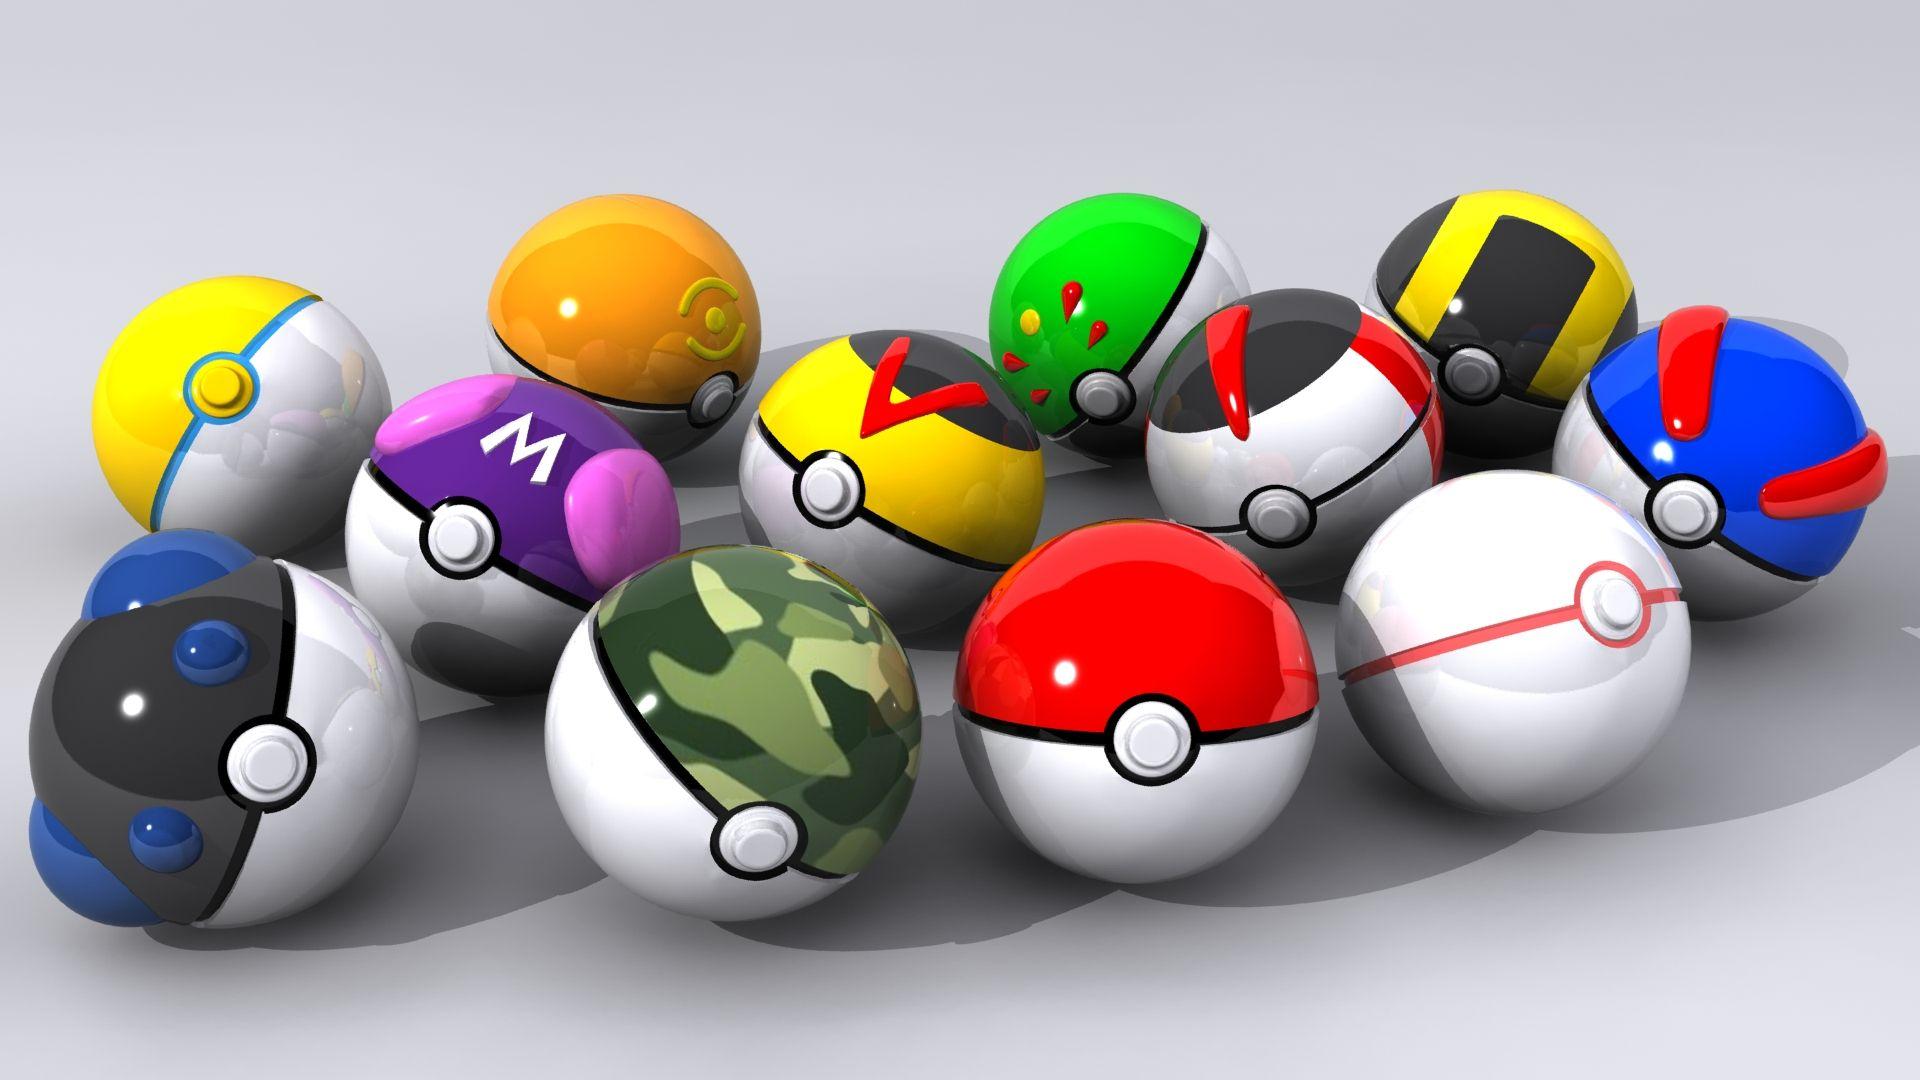 Pokeballs Wallpapers Wallpapers High Quality 